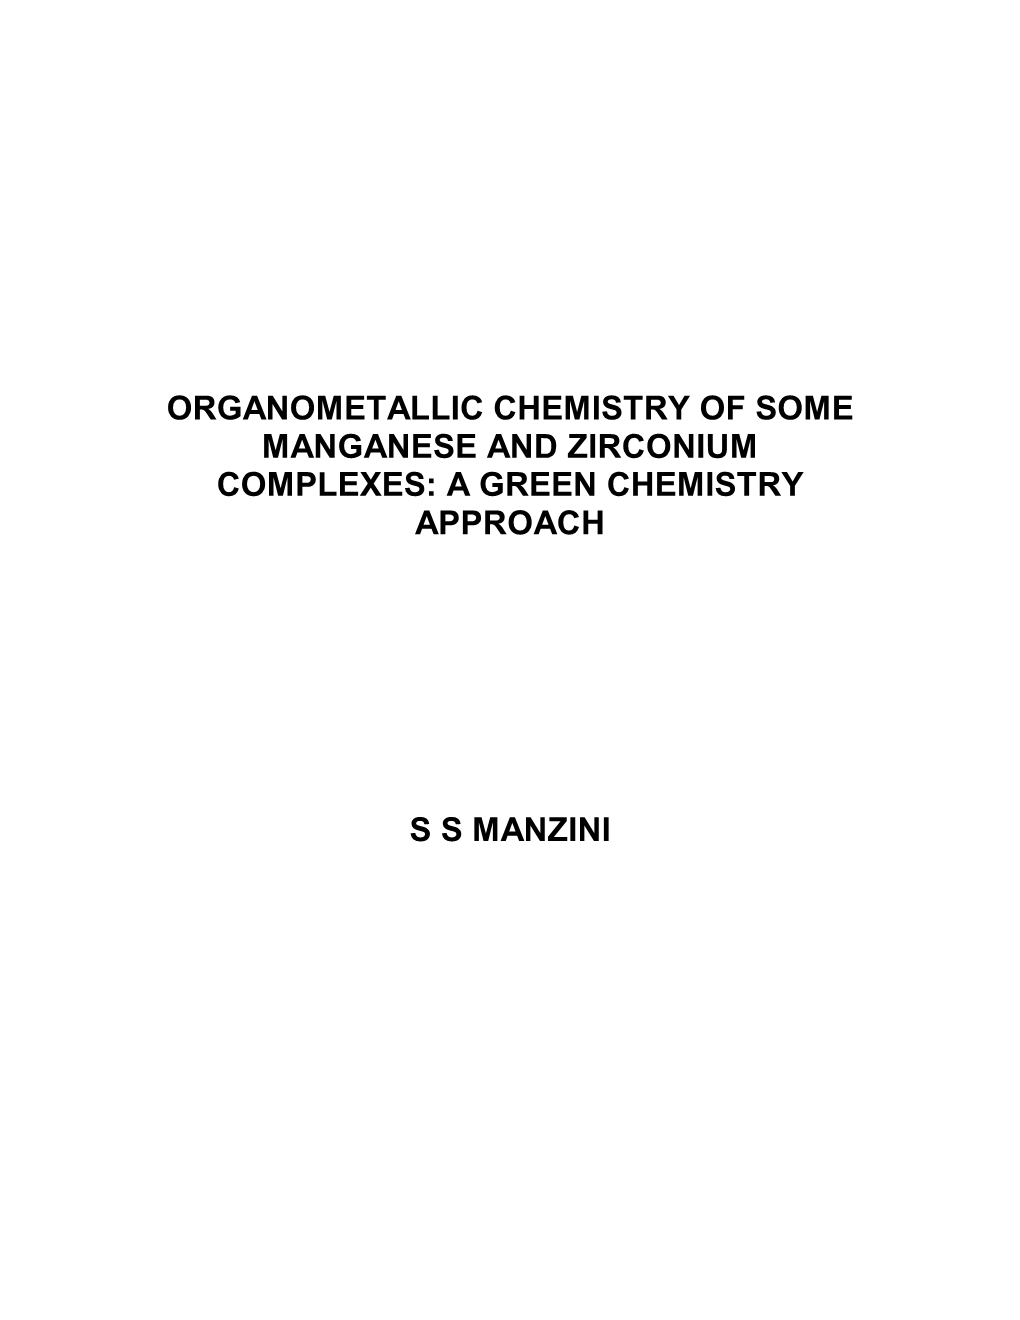 Organometallic Chemistry of Some Manganese and Zirconium Complexes: a Green Chemistry Approach